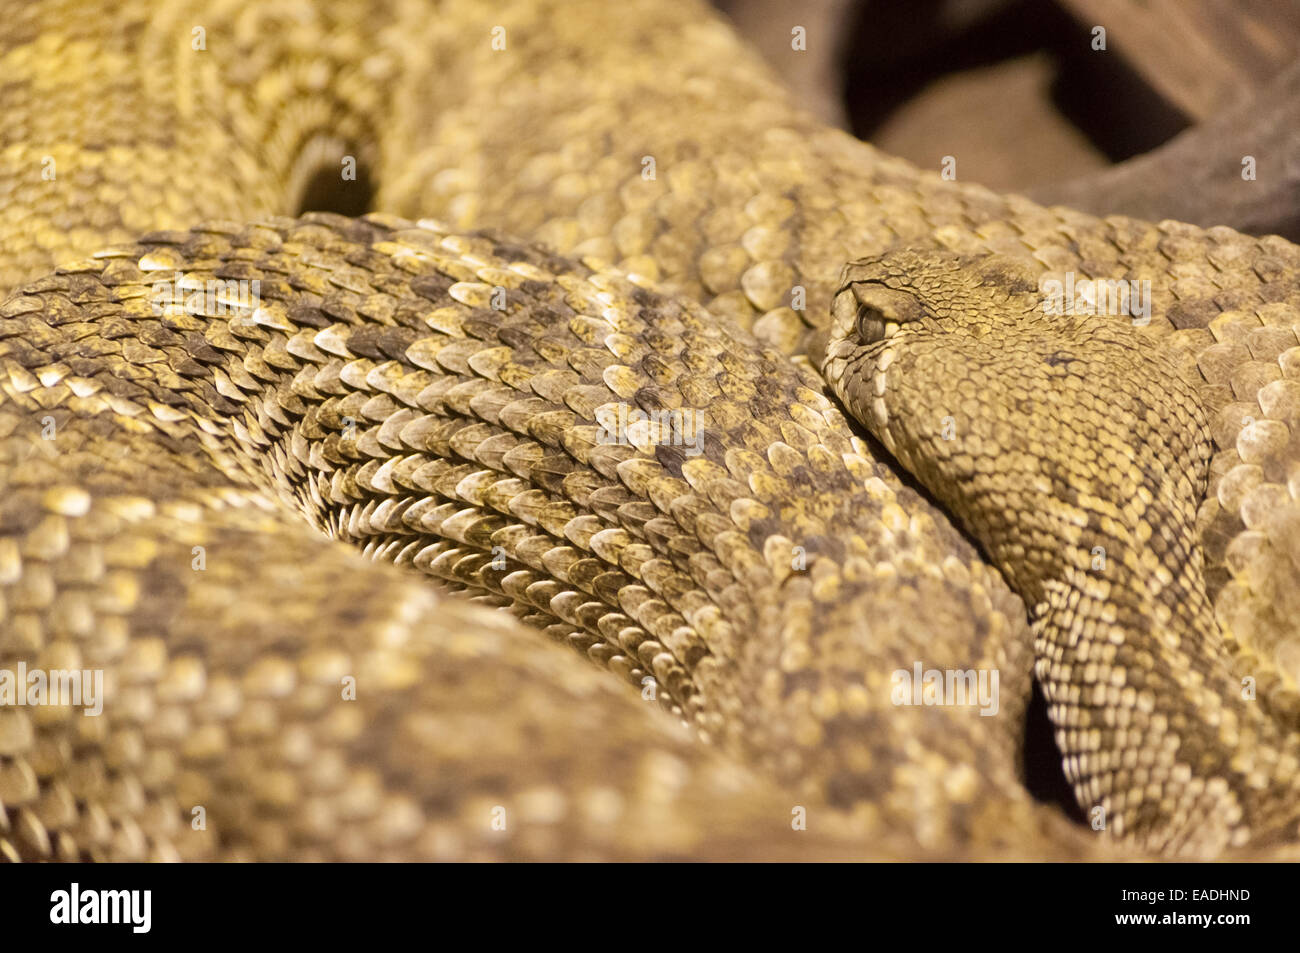 Coiled rattle snake Stock Photo